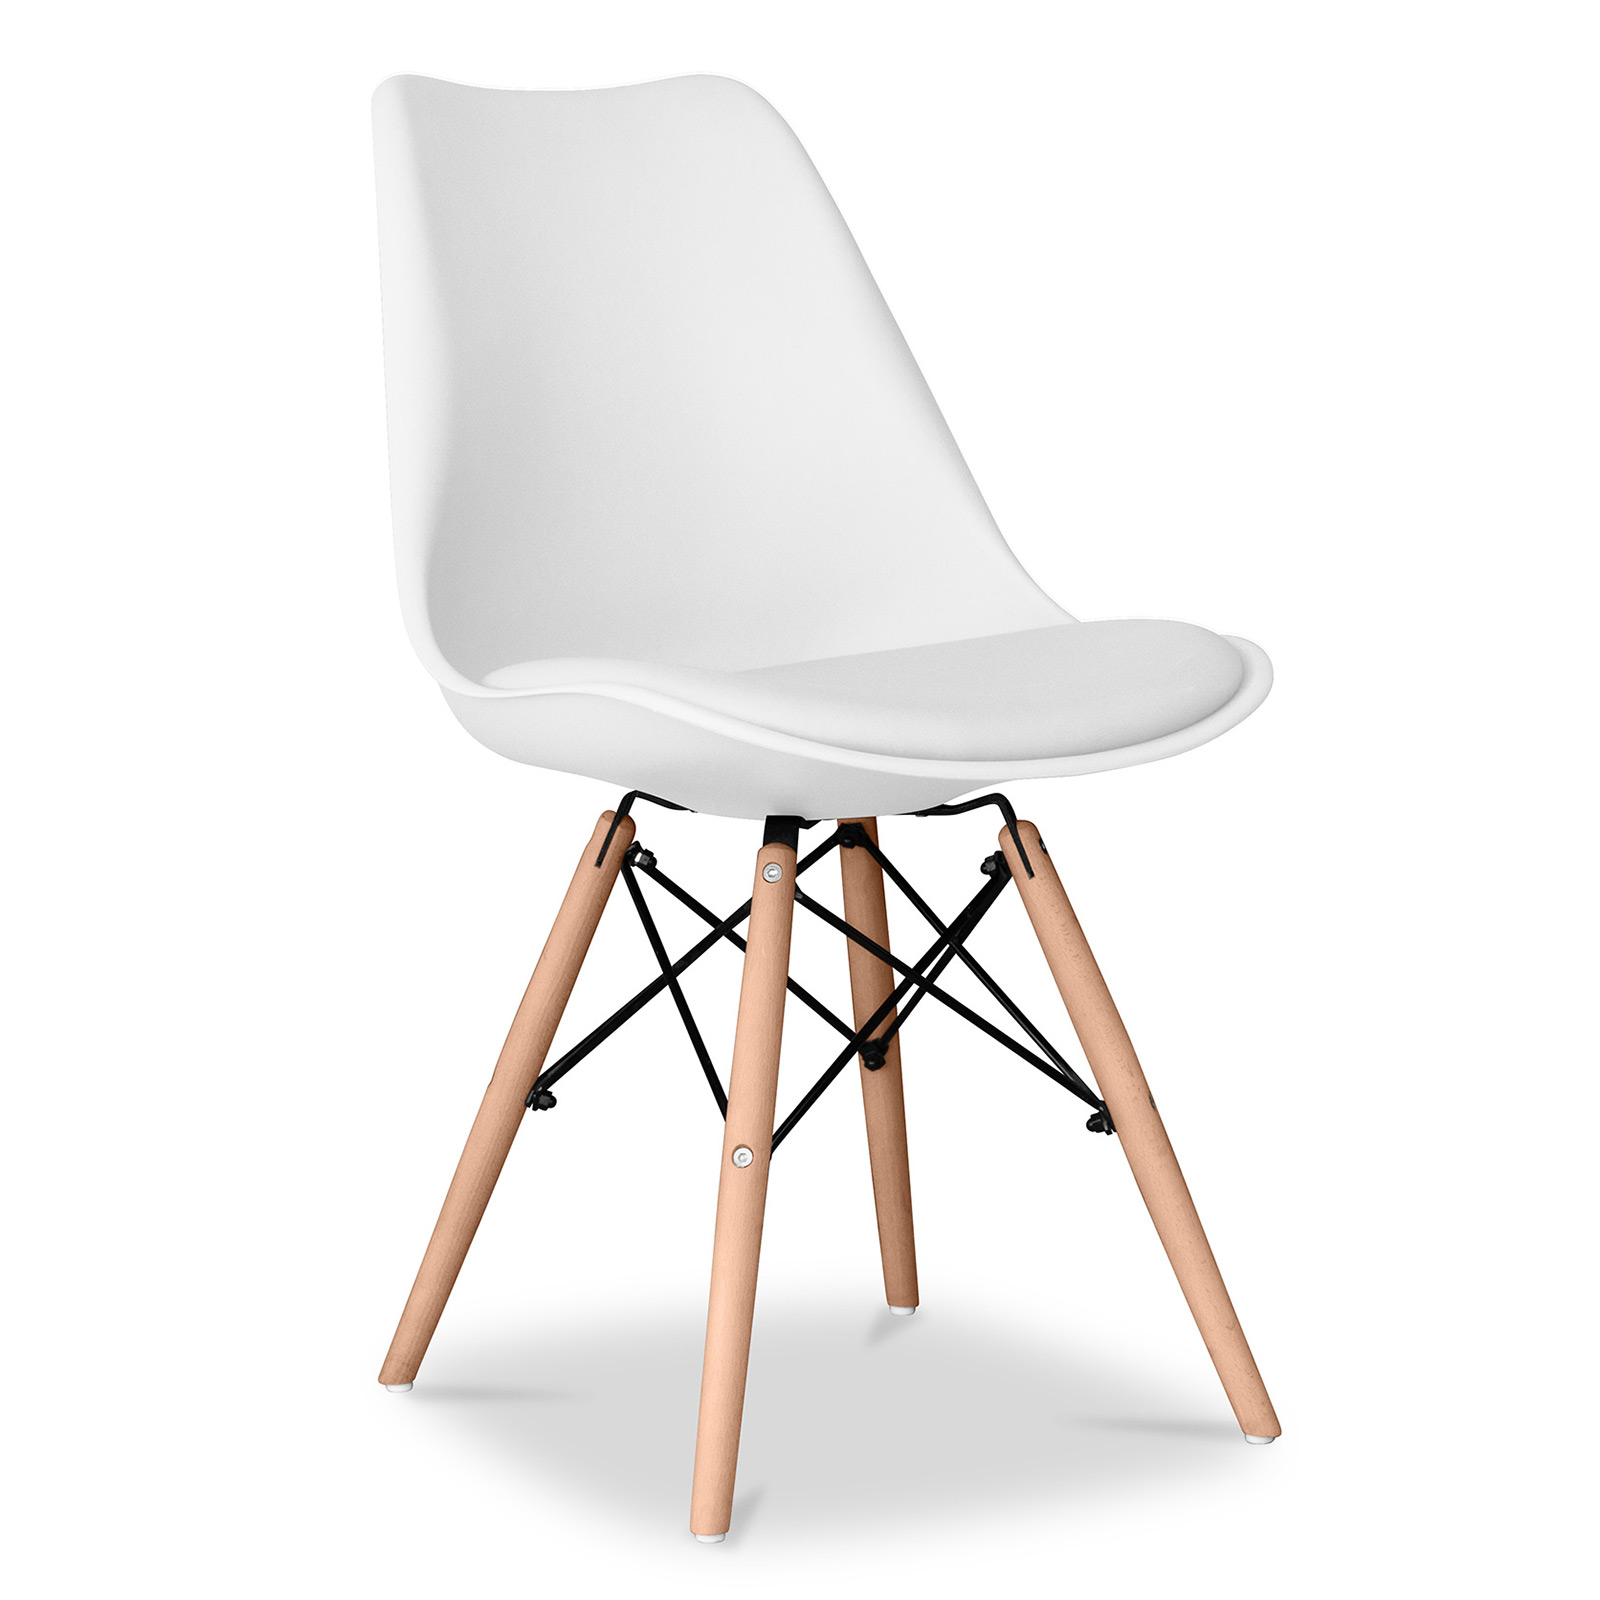 Buy DESWIN chair with cushion White 99958297 in the UK | Privatefloor